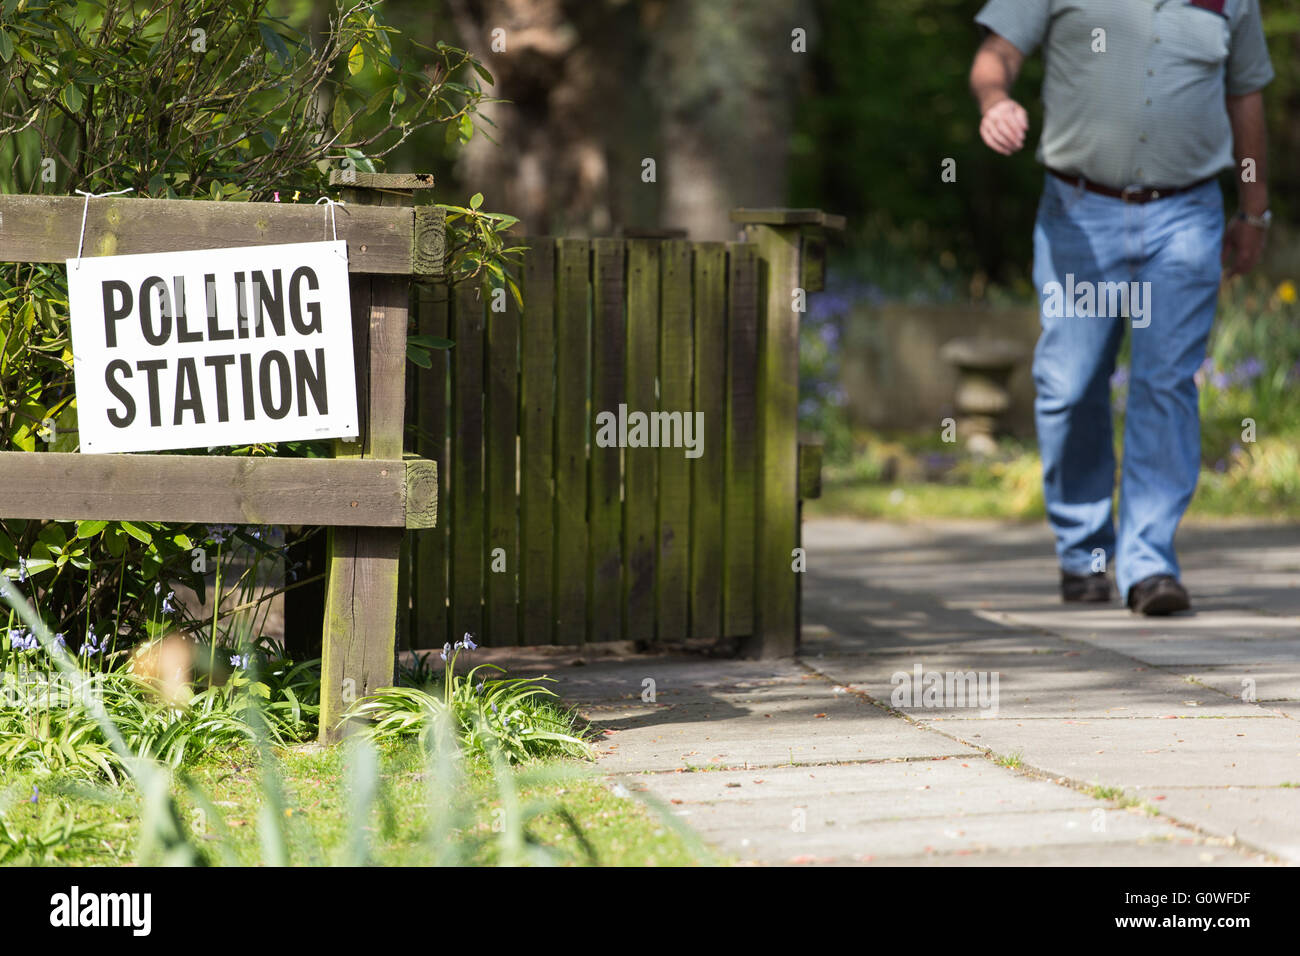 Formby, Merseyside. 5 May 2016. A member of the public leaves a polling station, near St Luke's Church, in Formby, after casting their vote in local elections, on 5 May 2016. Credit:  Harry Whitehead/Alamy Live News Stock Photo